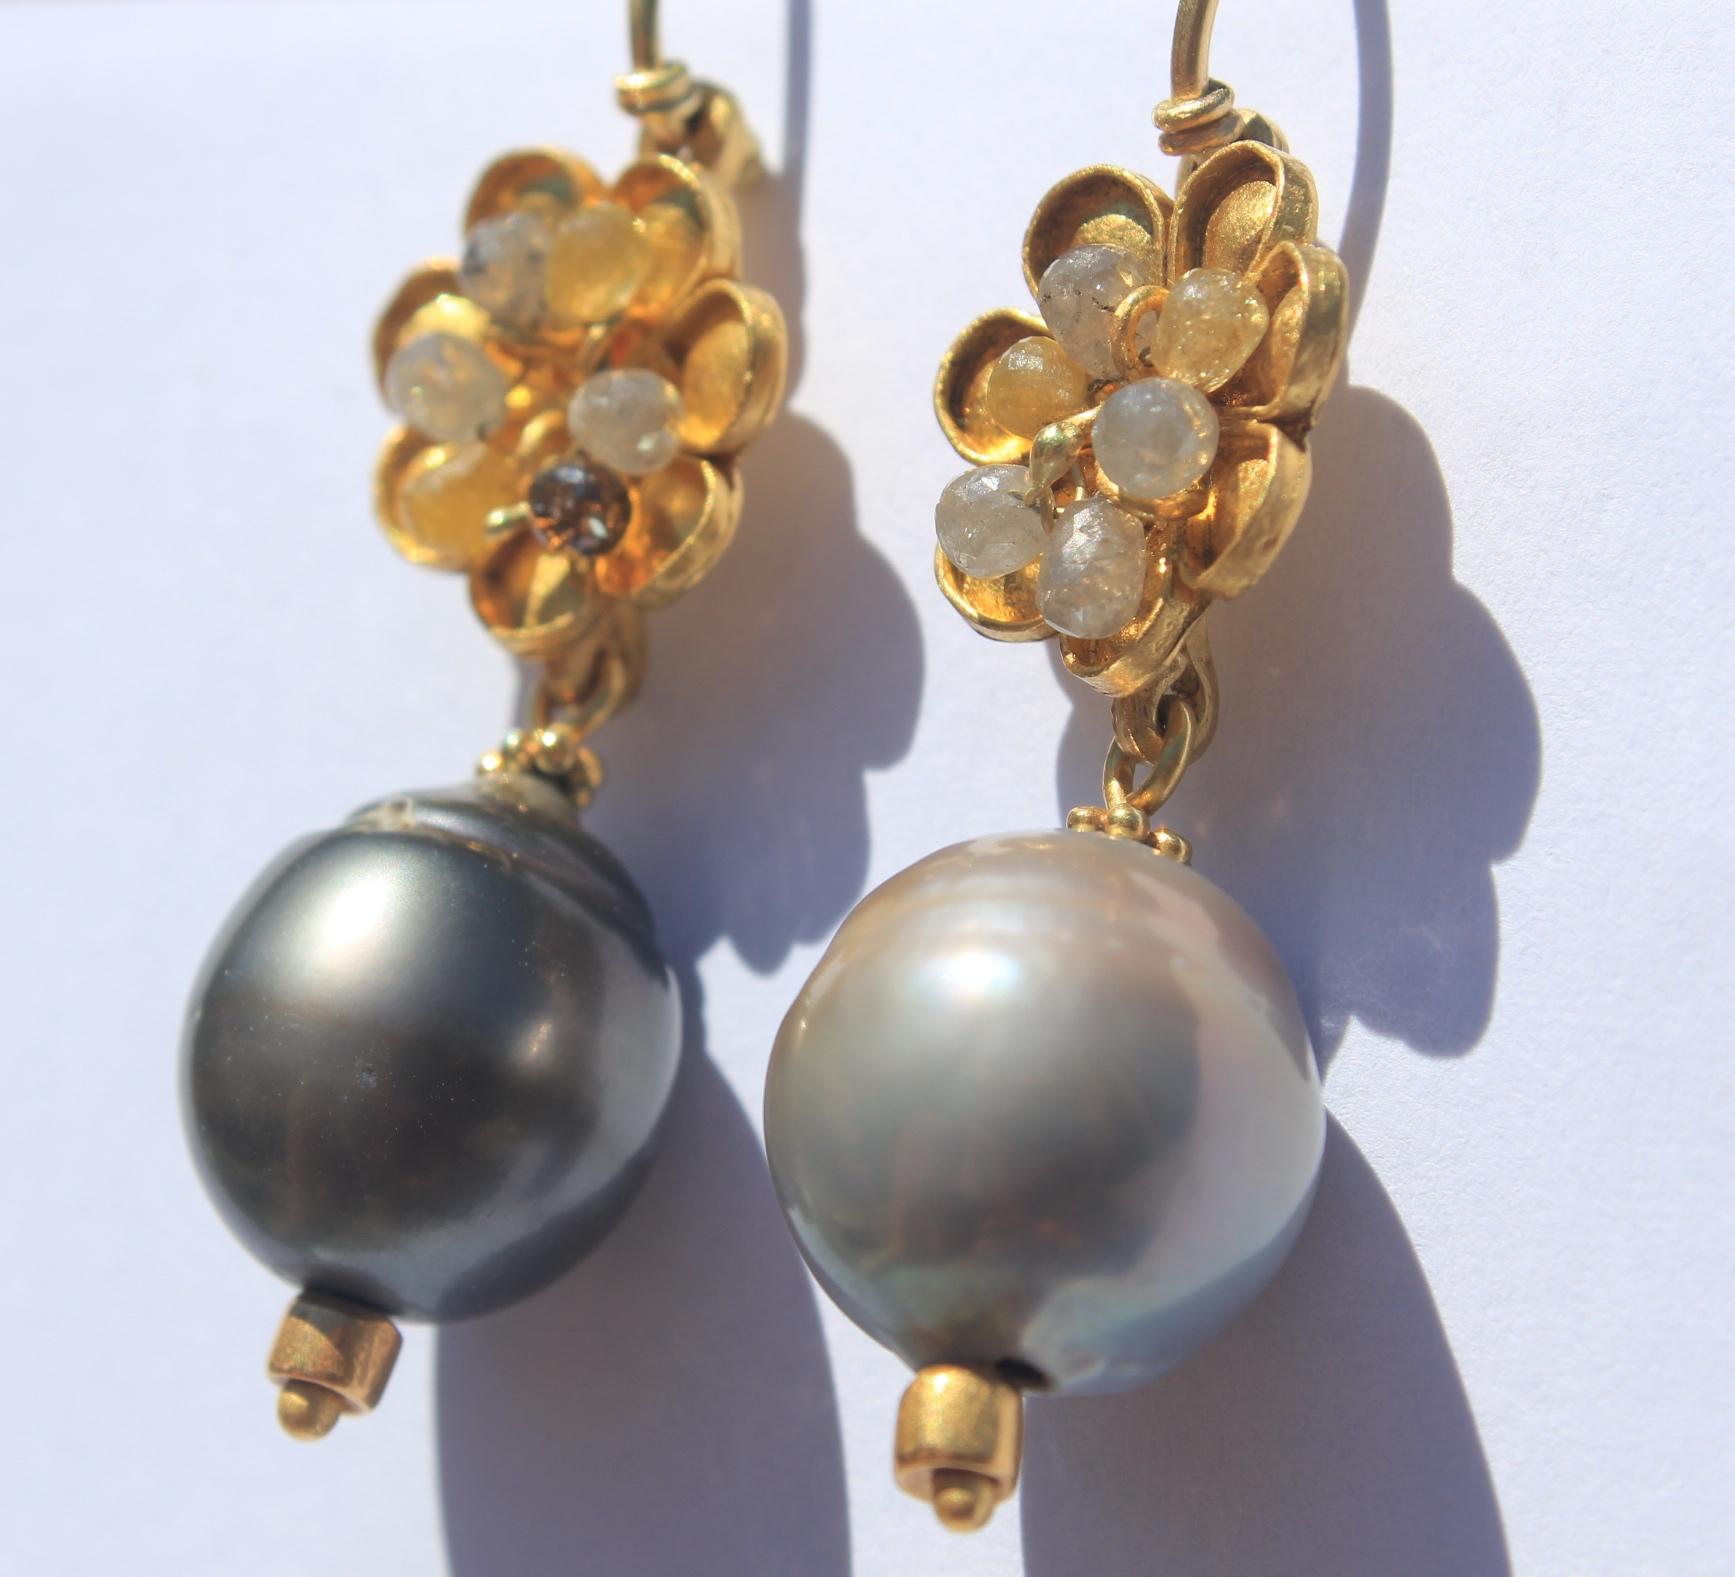 Custom order. Grey Garden Drop Earrings. These 22K gold elegant contemporary dangle earrings featuring Tahitian Pearls and diamond briolettes look great worn every day. They will also dress up any outfit for a special occasion.

These earrings are